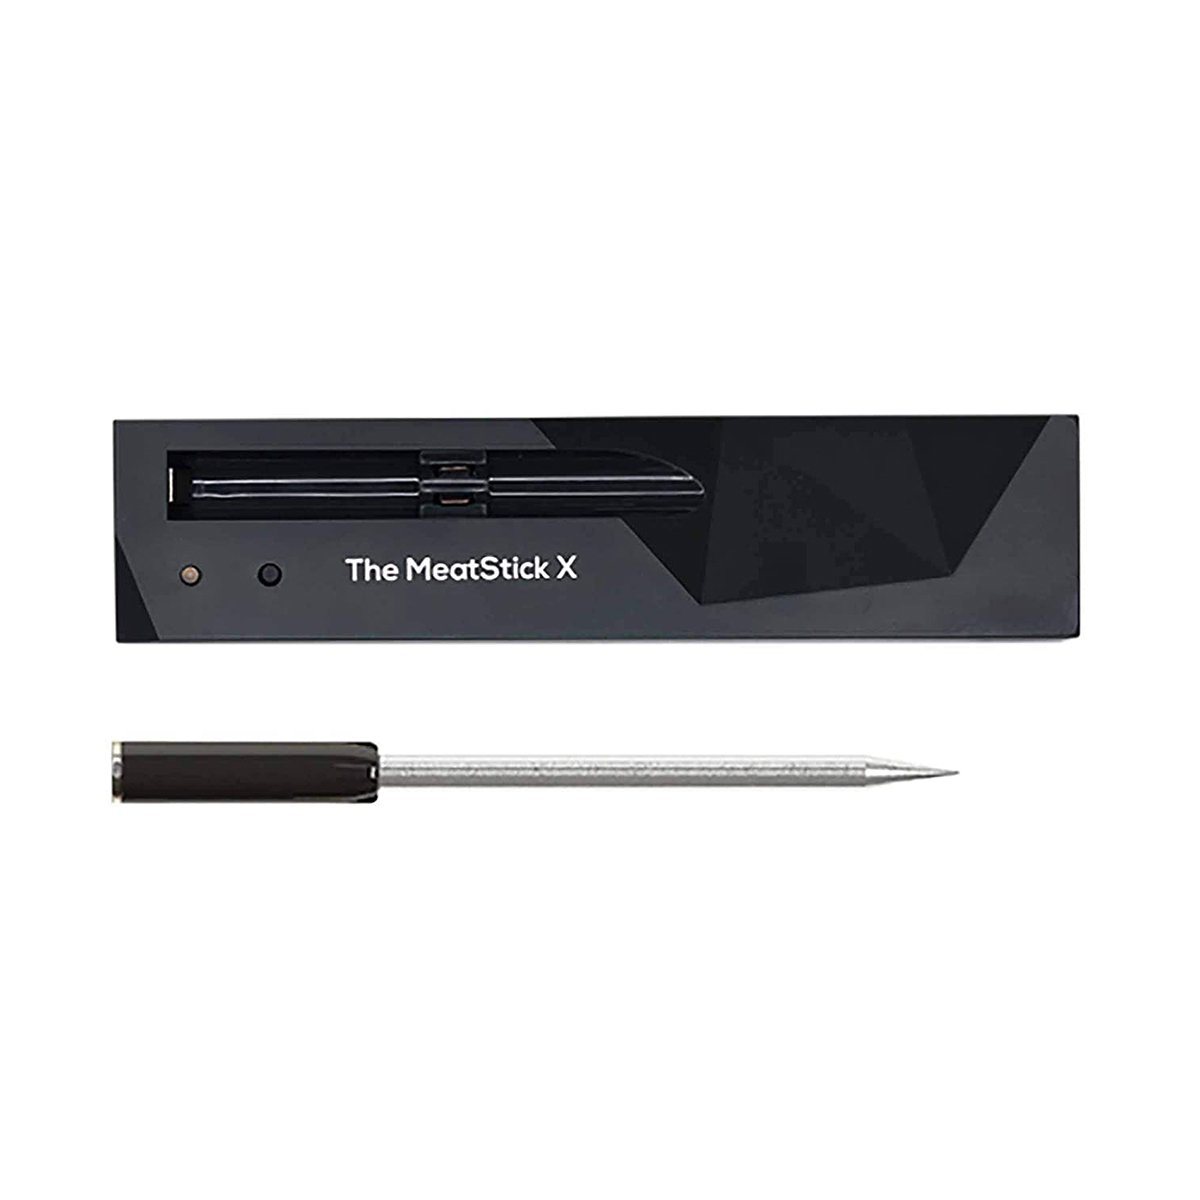 The MeatStick Set, Wireless Meat Thermometer